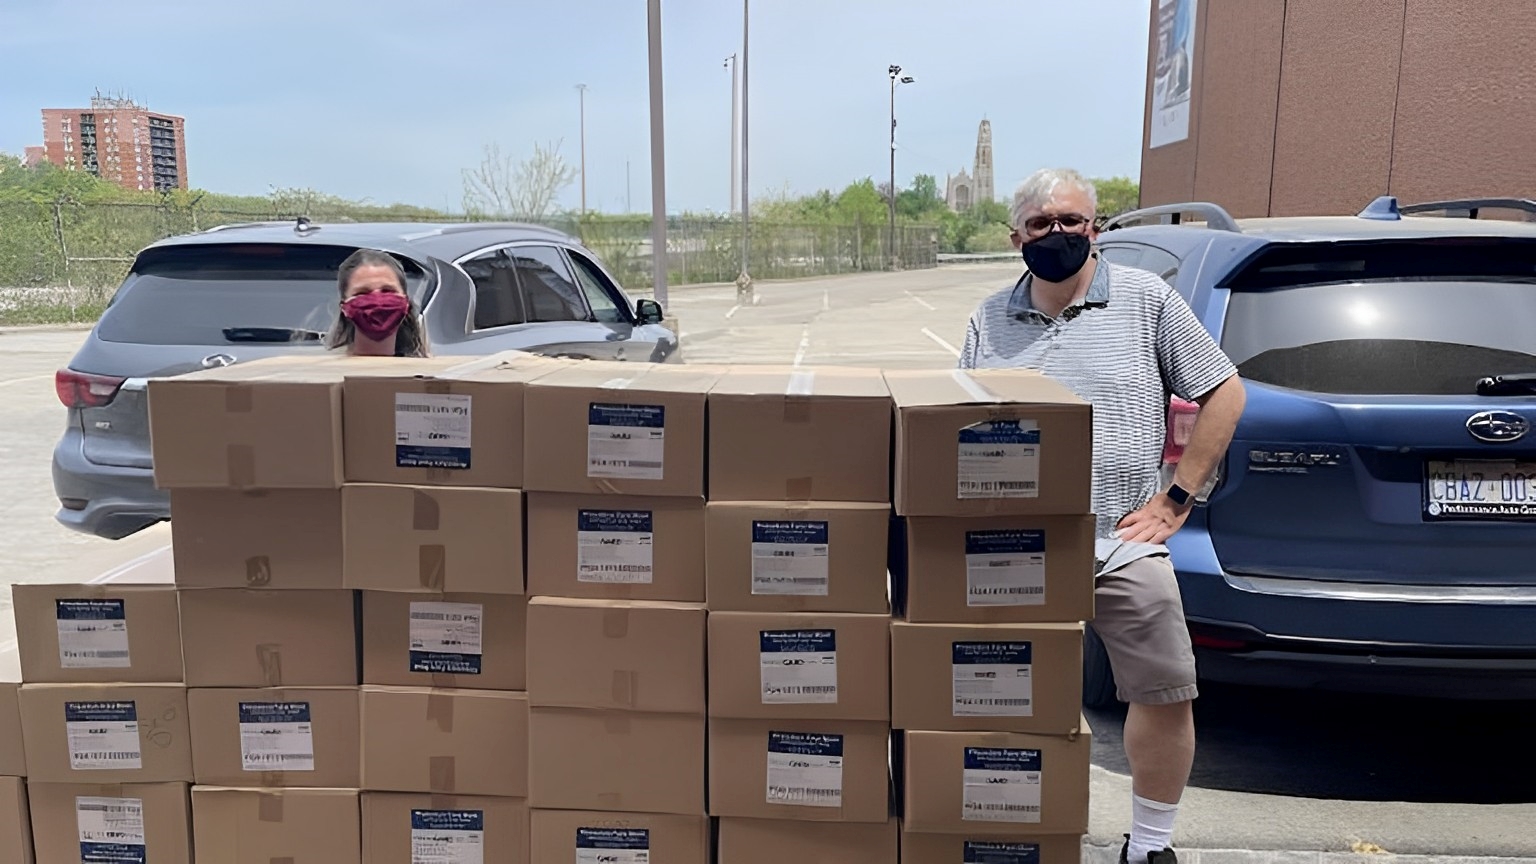 two people standing behind a large stack of boxes.